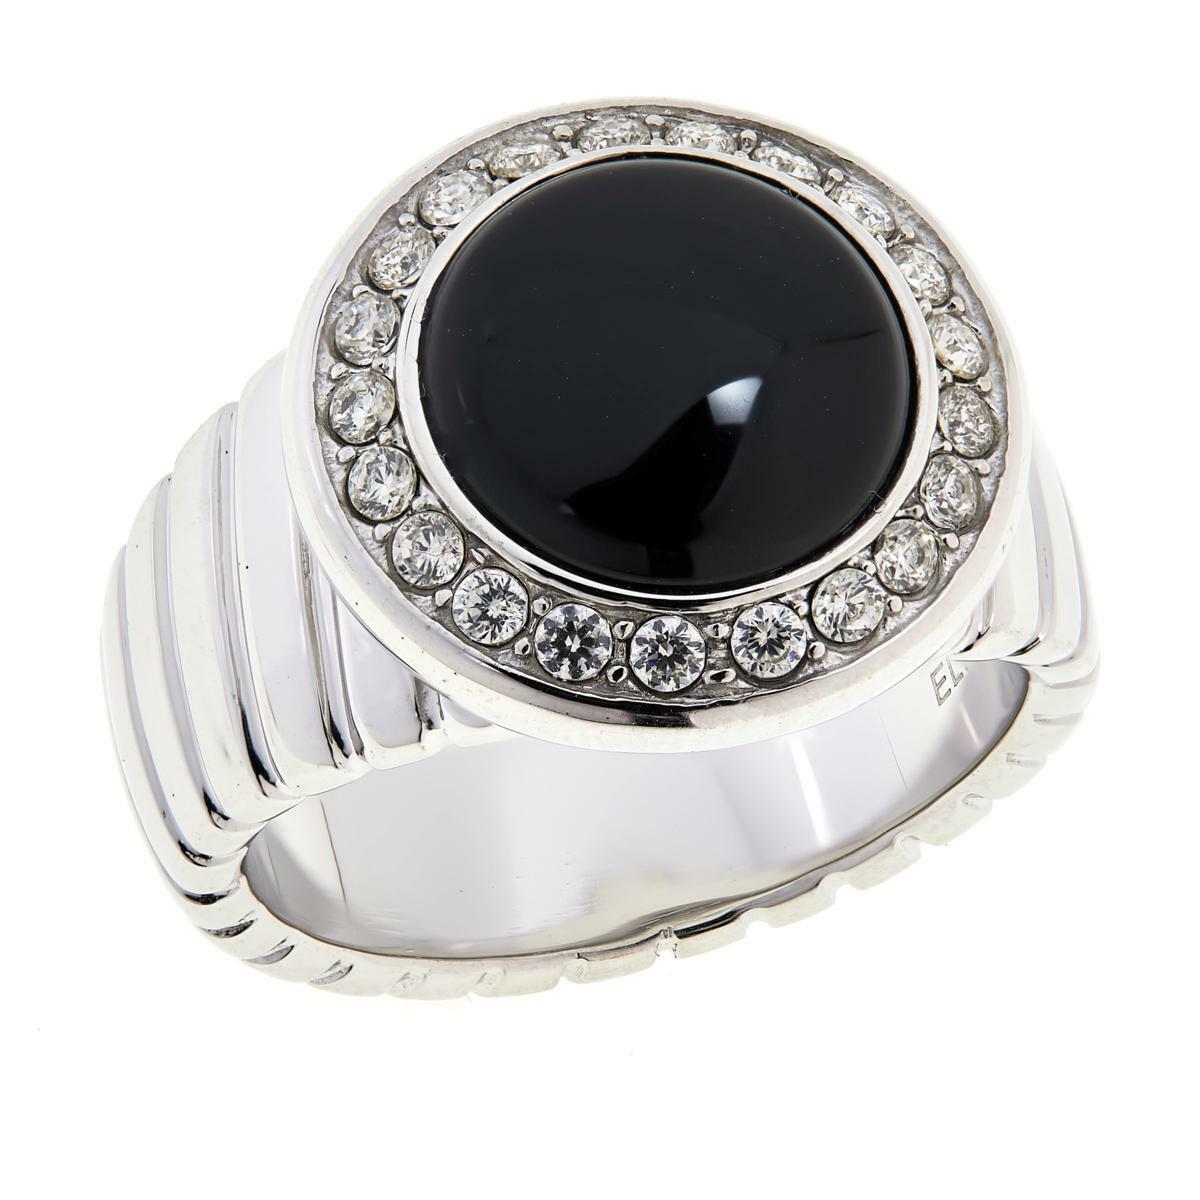 Colleen Lopez Black Cabochon and White Topaz Ring, Size 5